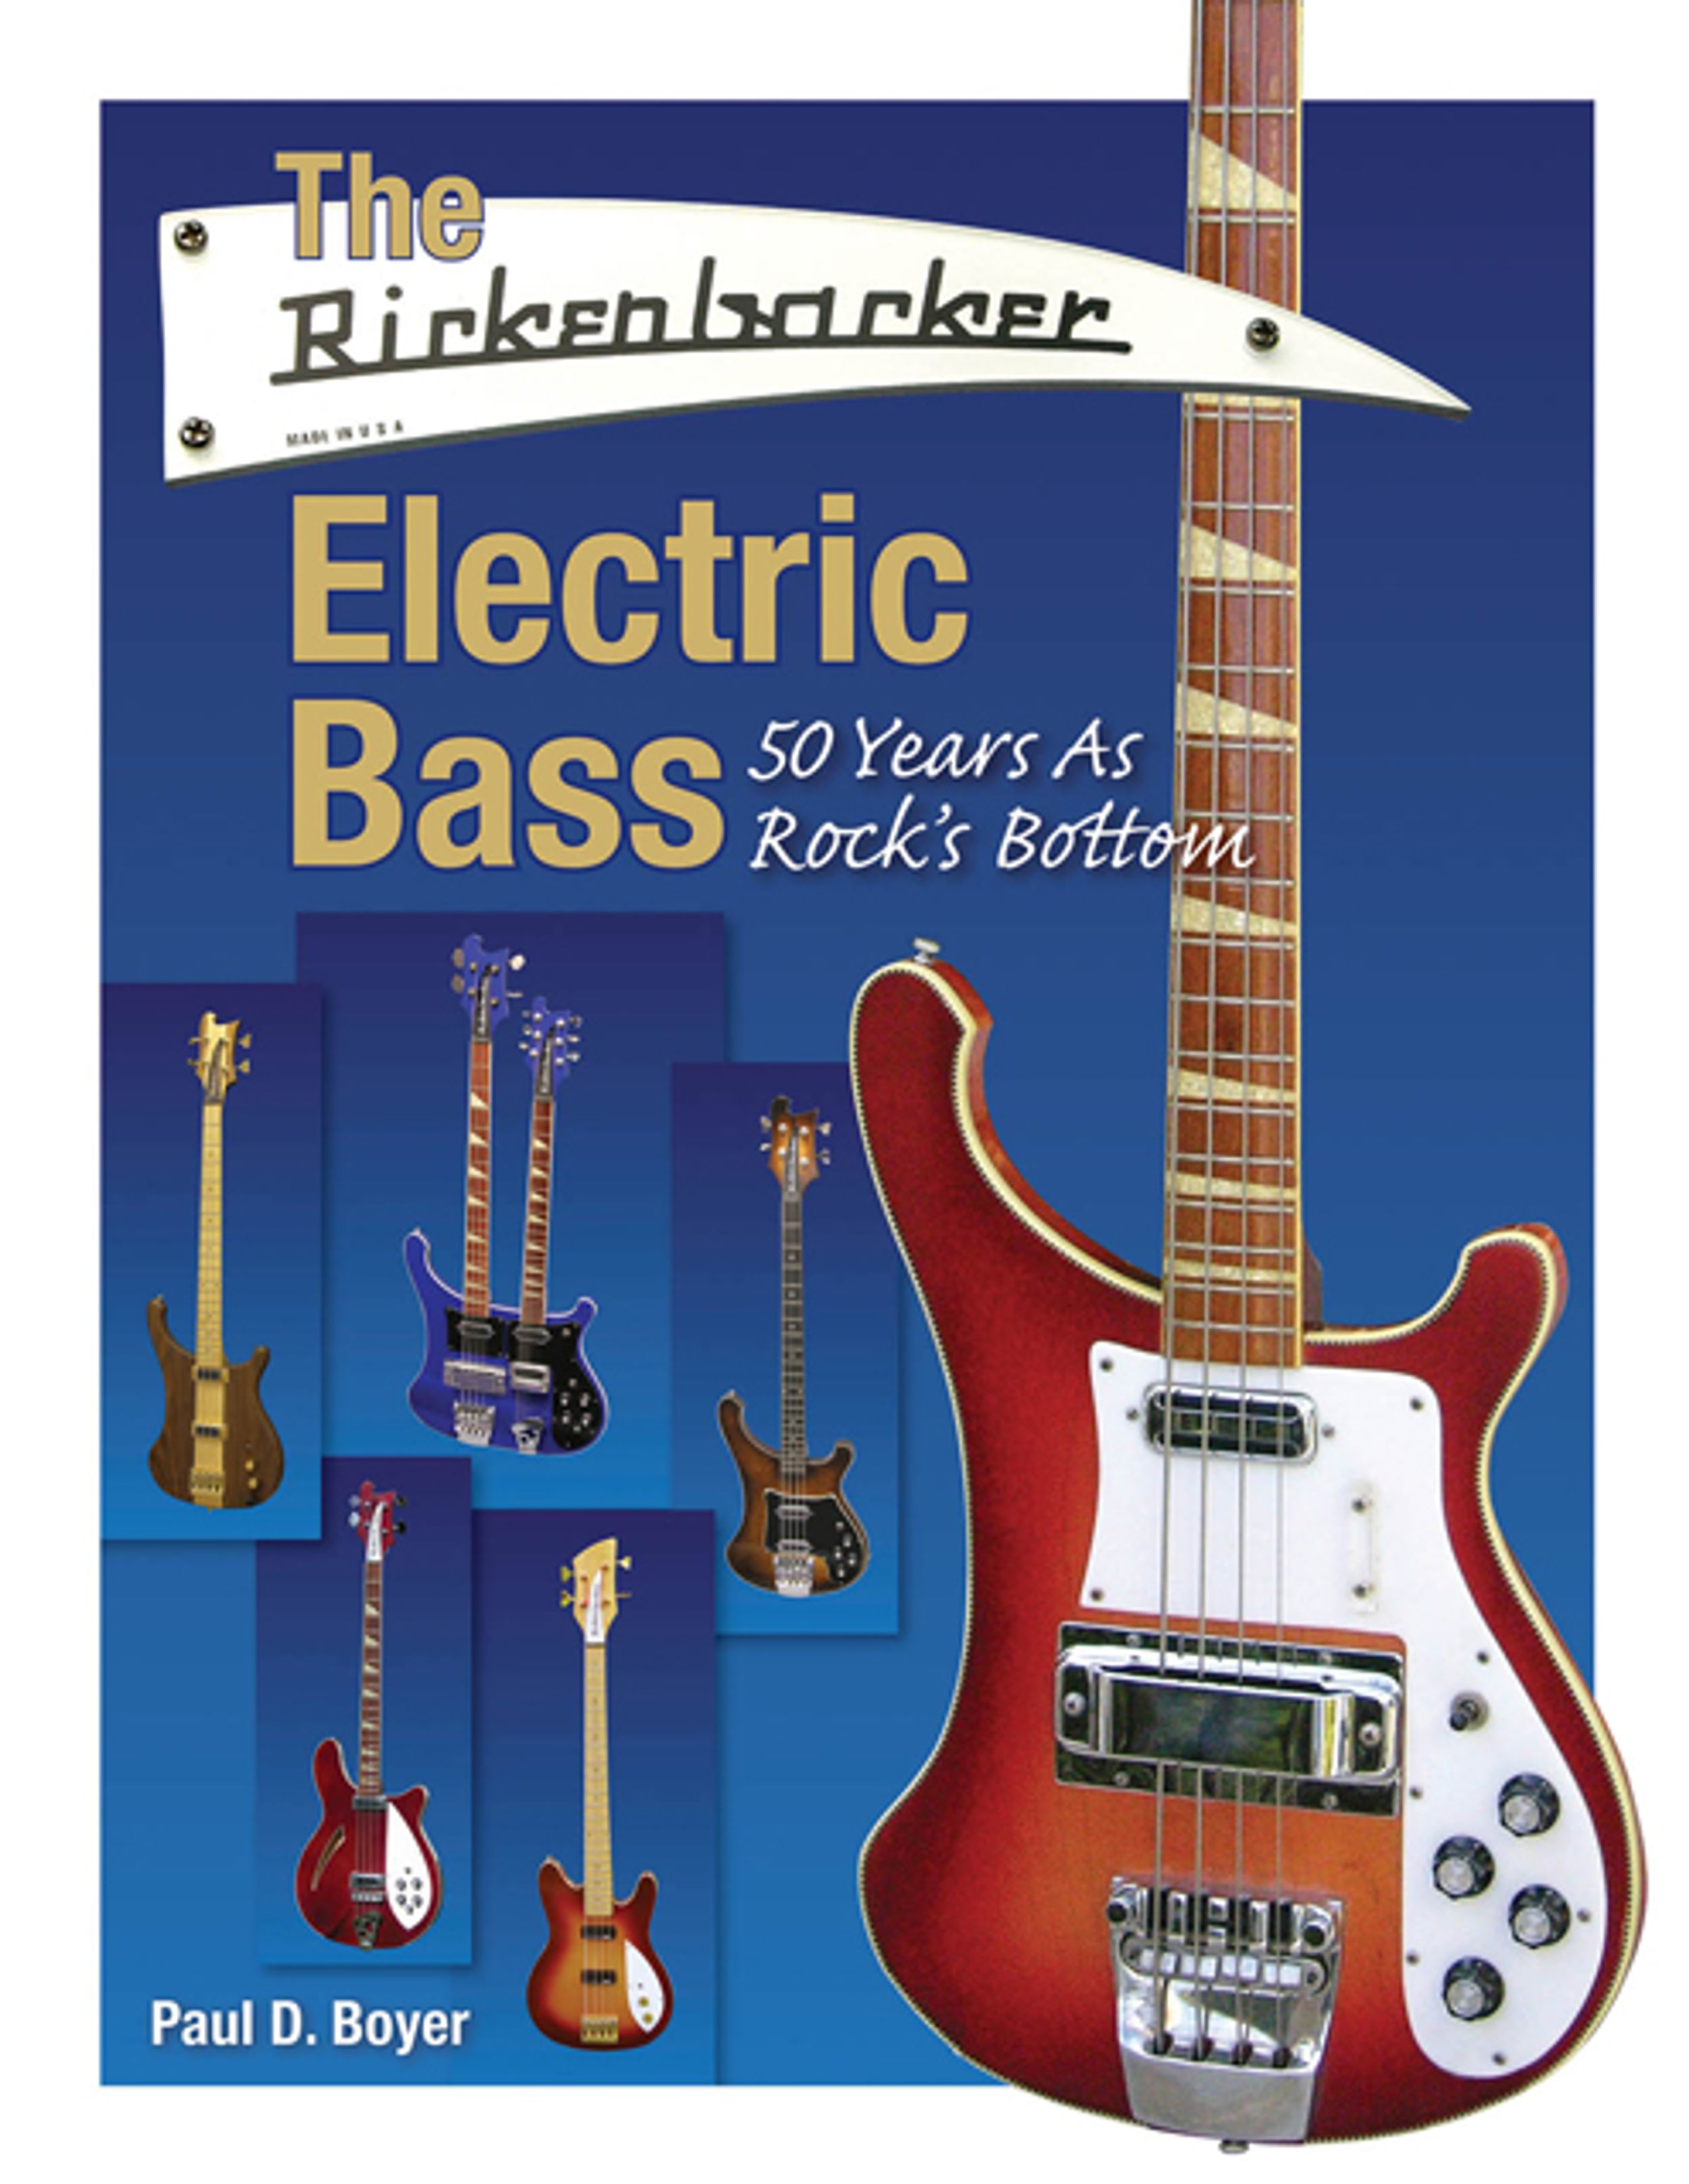 Hal Leonard Publishes "The Rickenbacker Electric Bass - 50 Years as Rock’s Bottom" Book